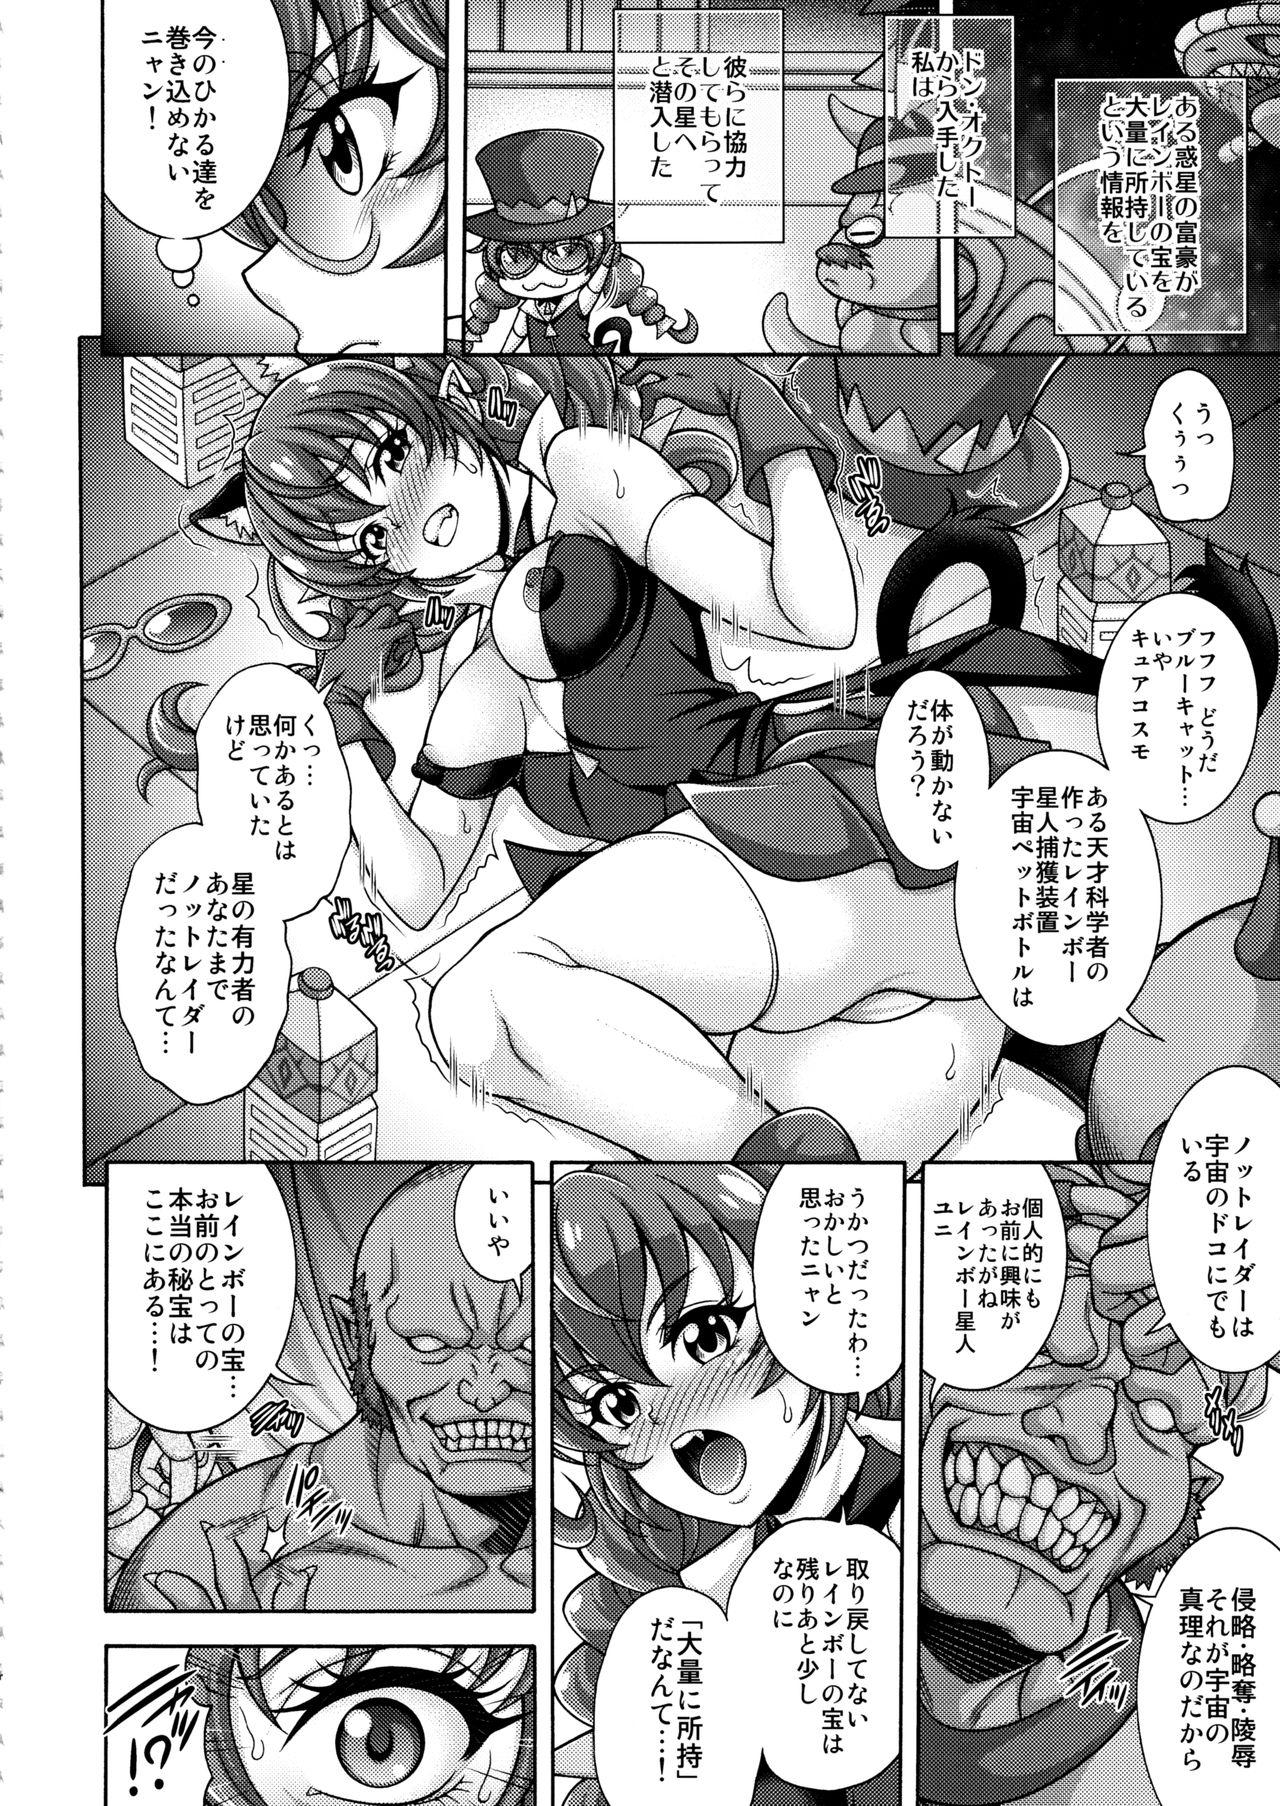 Russian Harameite Ginga - Star twinkle precure Leite - Page 3